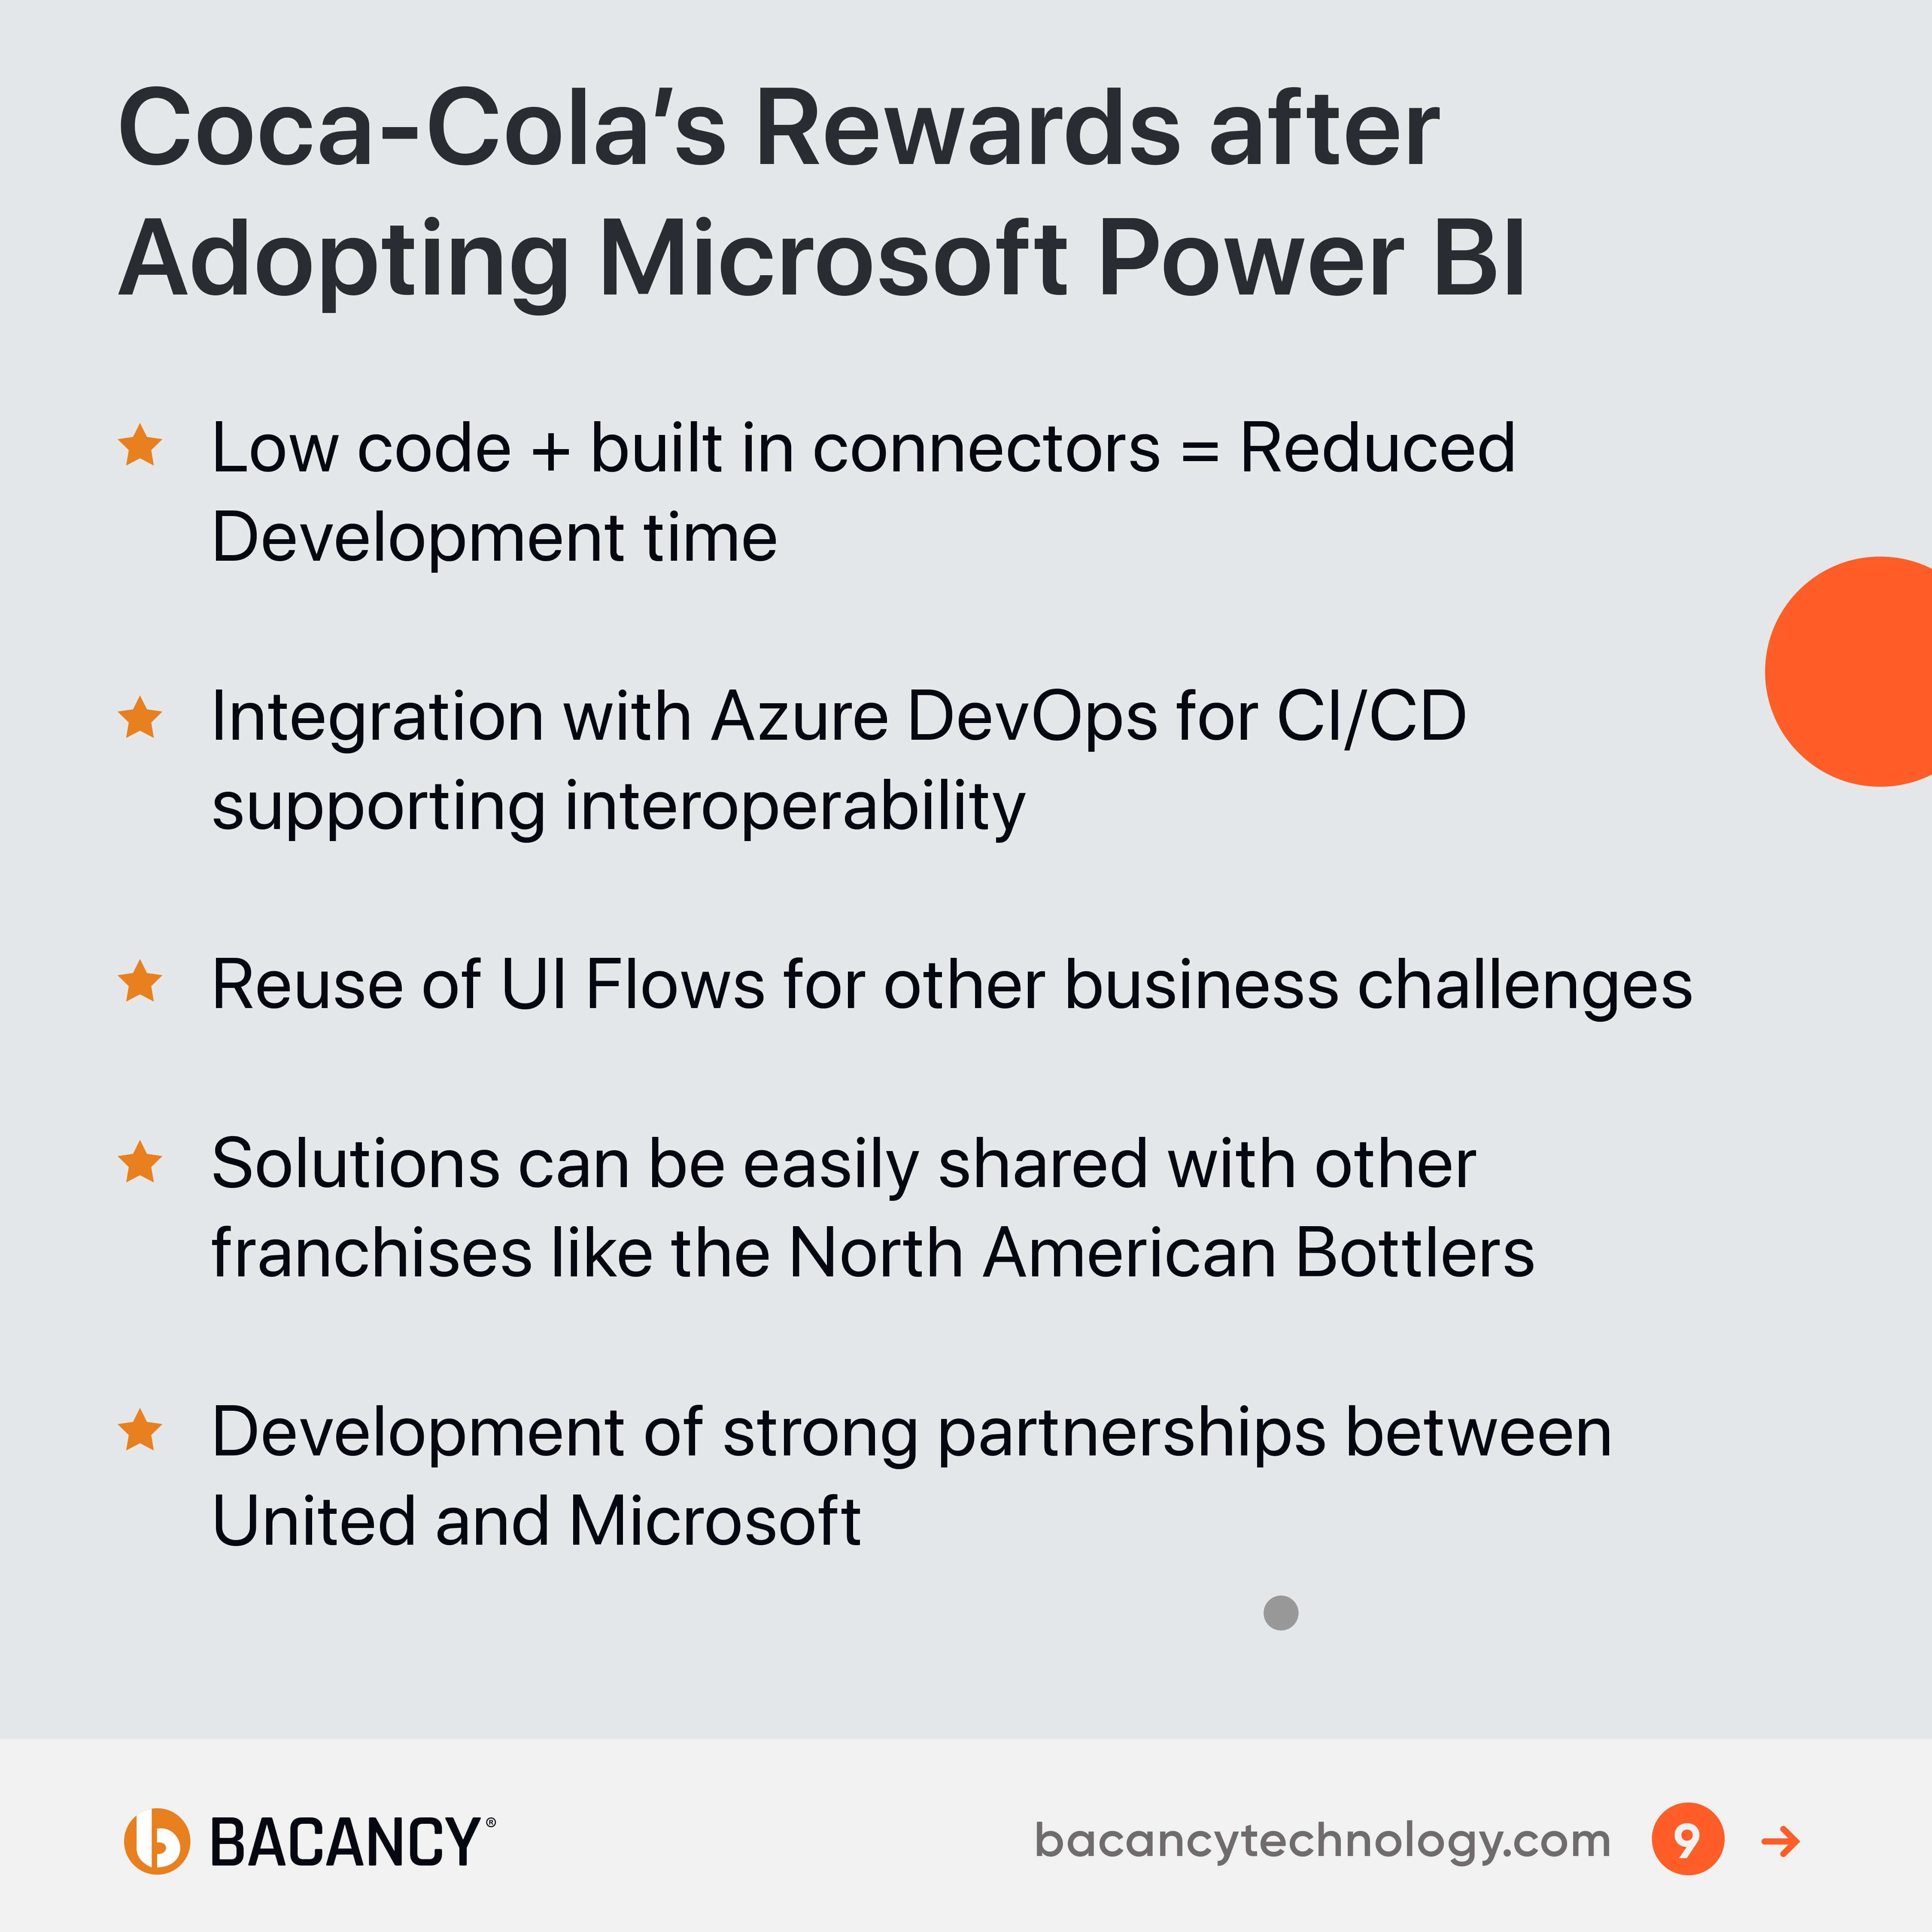 How Coca-Cola United governs its fast development with Microsoft Power Platform